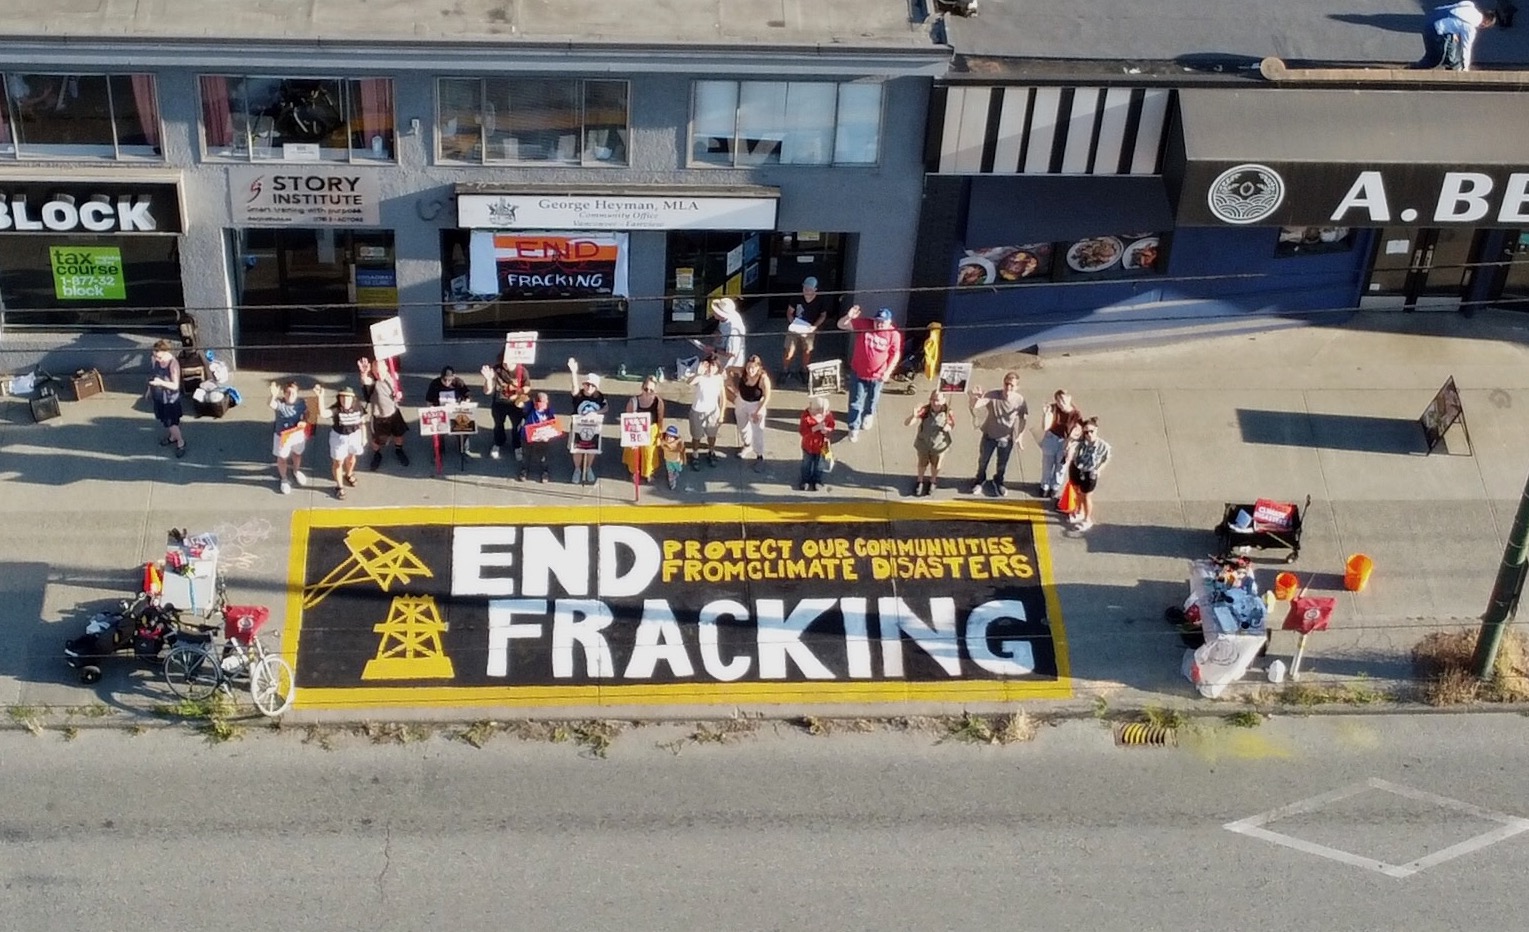 Aerial drone photo of an end fracking banner outside george heyman's office